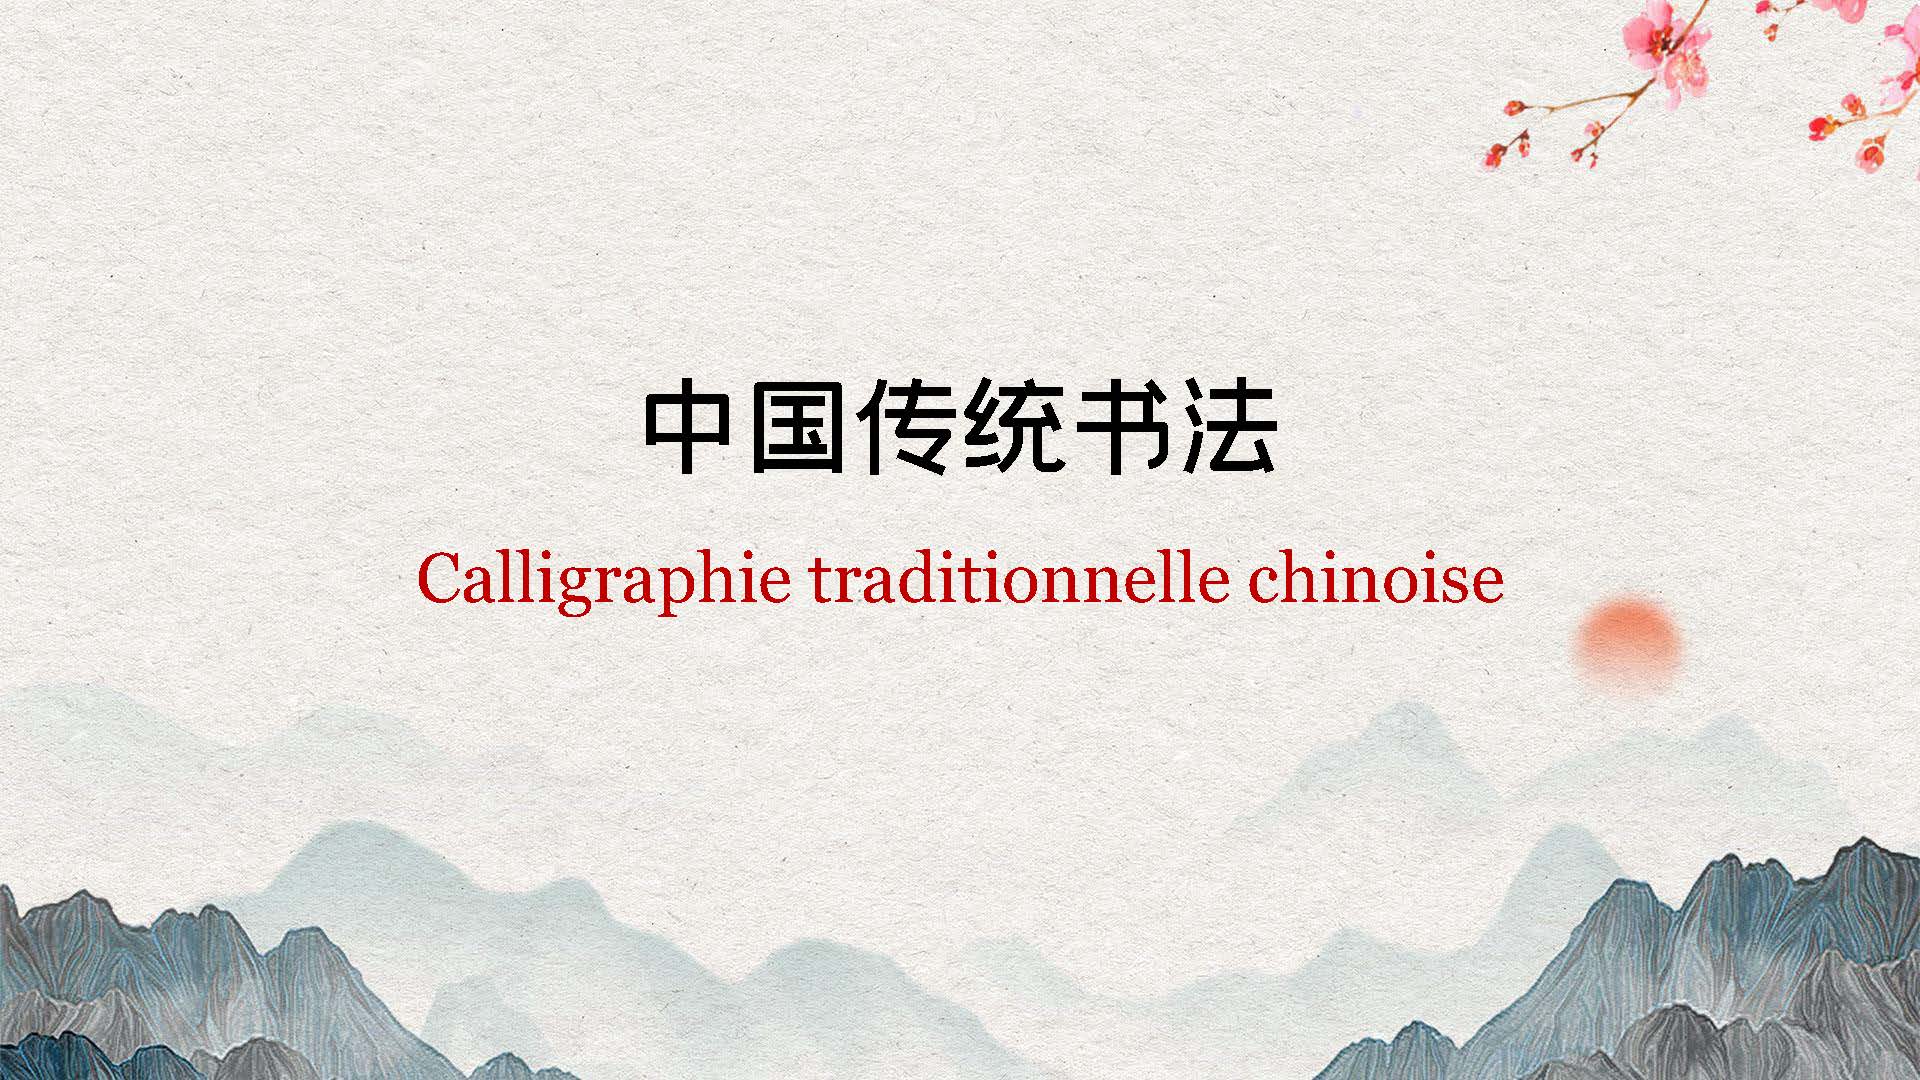 Calligraphie traditionnelle chinoise